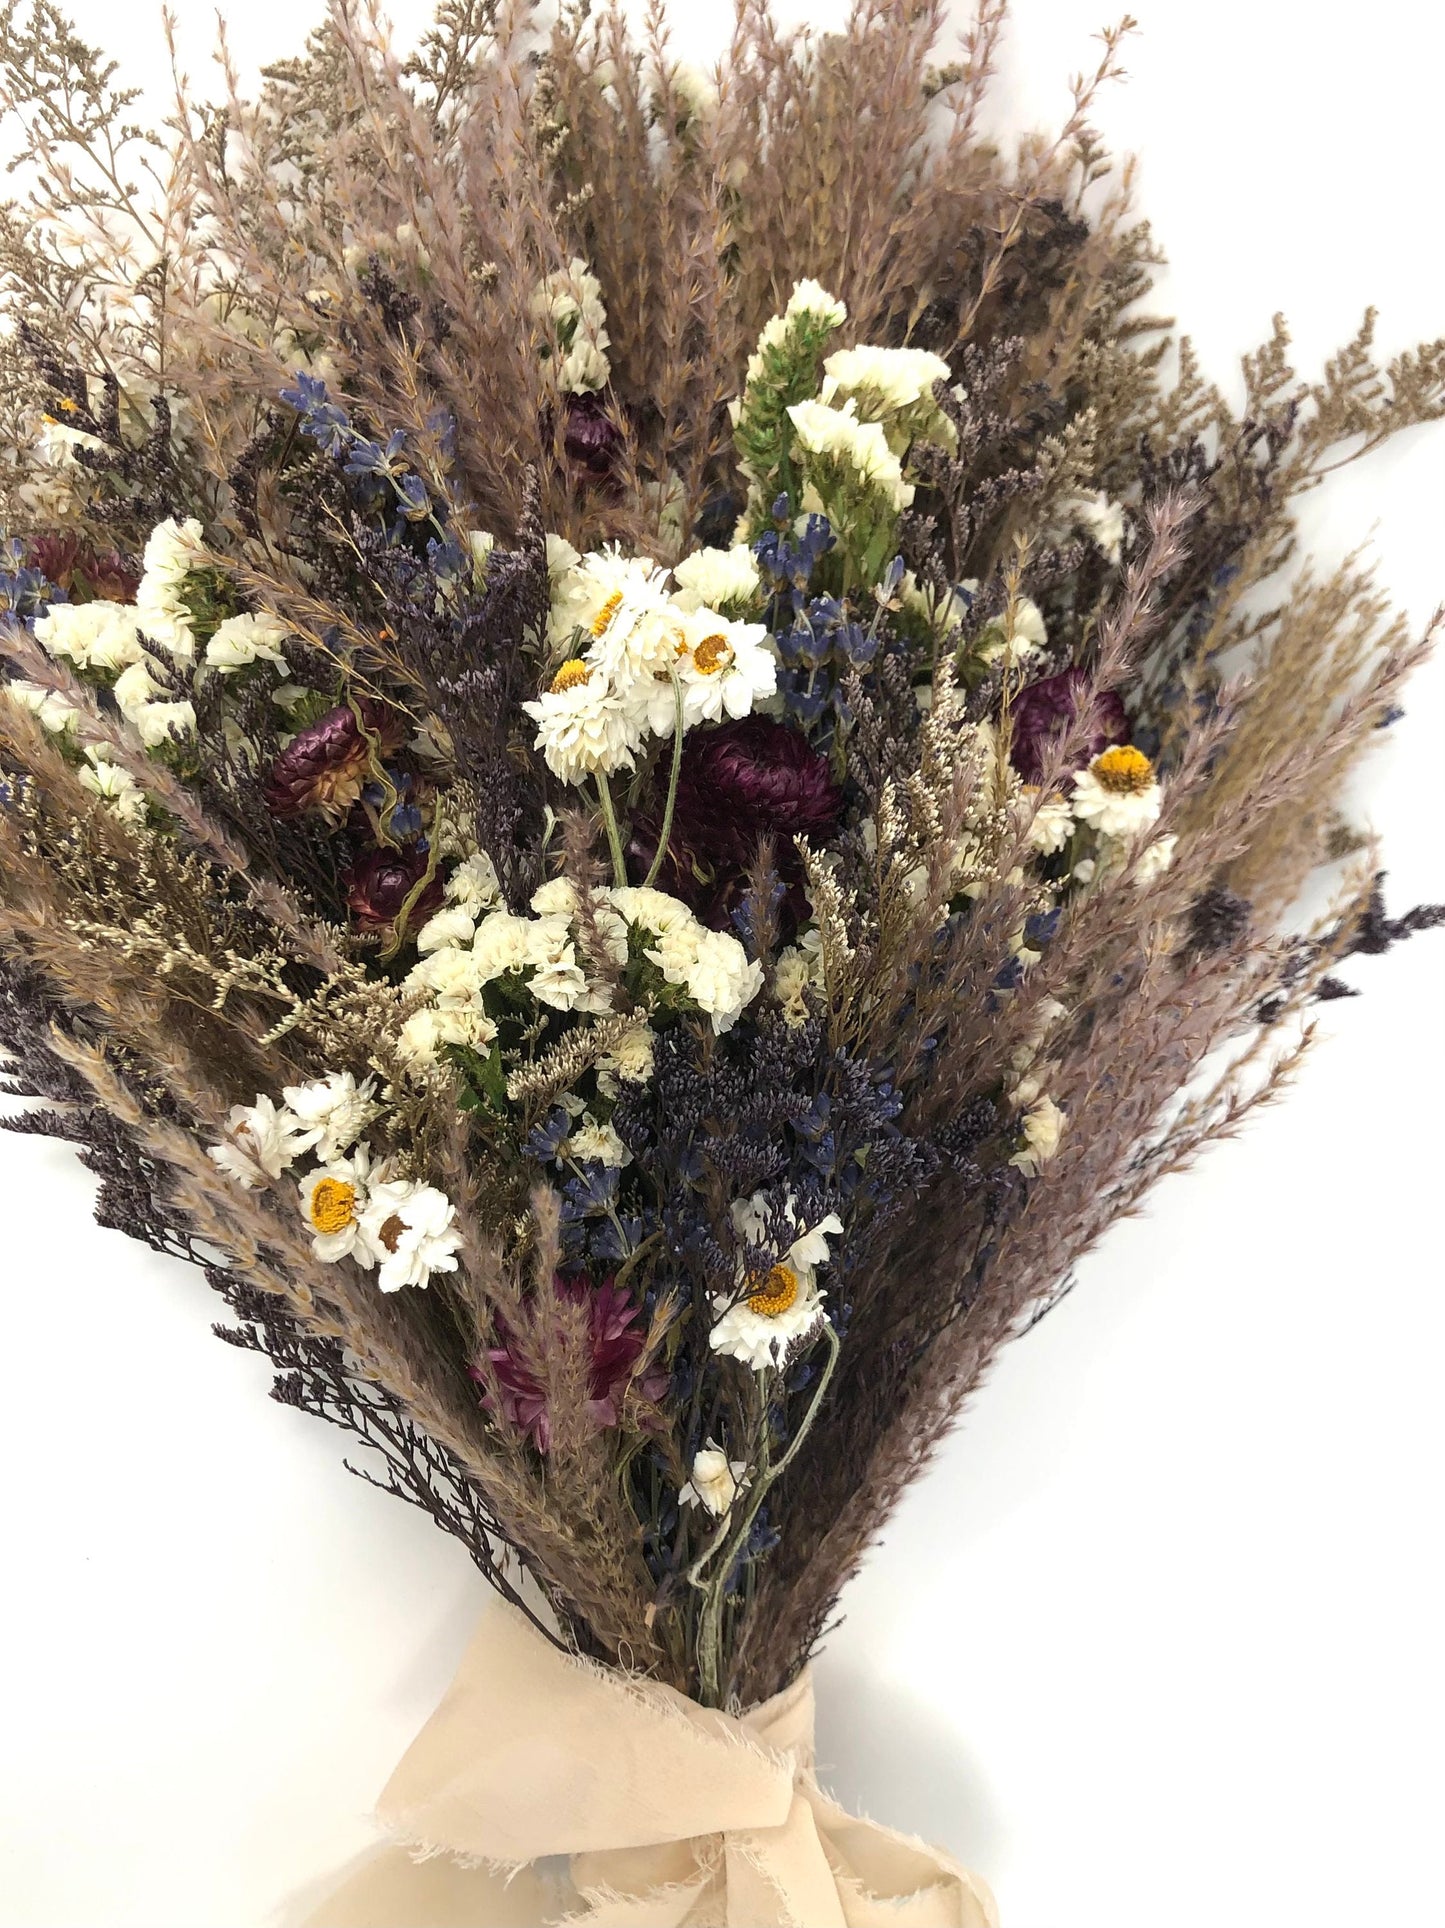 Wedding Bouquet, Dried Flowers, Beige, Brown, Purple, Fall, Wildflowers, Modern, Boho, Preserved, Floral, Pampas, Feather Grass